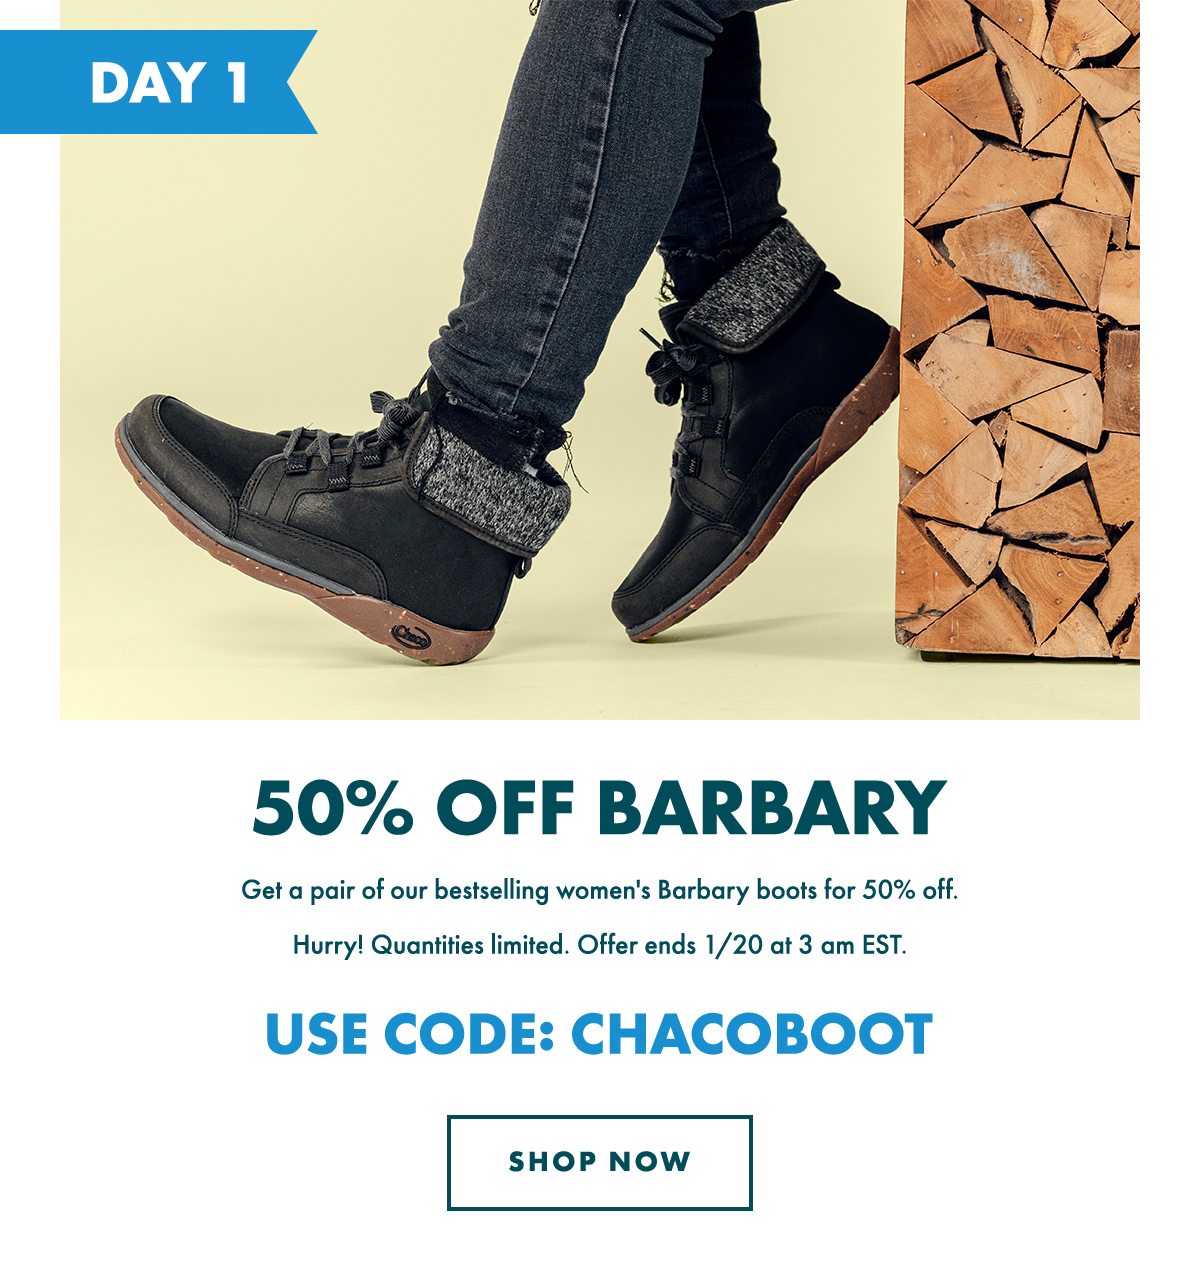 50% OFF BARBARY - USE CODE: CHACOBOOT